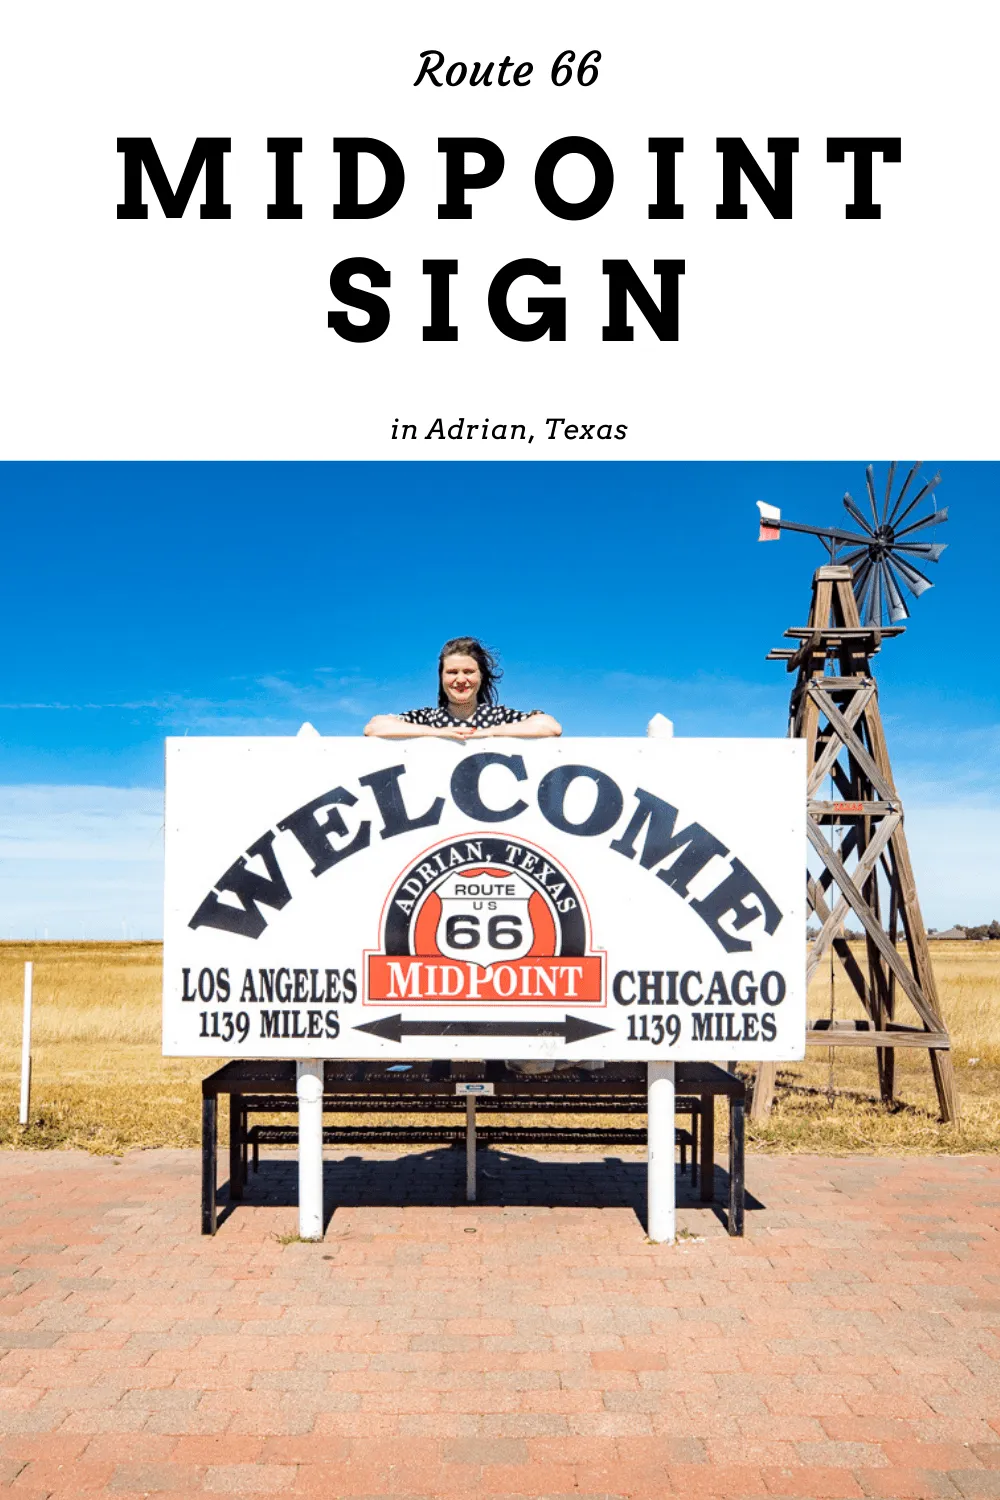 It’s “more than two thousand miles all the way” to travel Route 66 from Chicago to California. 2,278 miles to be exact. So, it’s only fitting that at mile 1,139, there’d be a place to celebrate. Visit Adrian, Texas, a town 1,139 from the starting point in Chicago and 1,139 miles from the end point in California. And be sure to check out the Route 66 Midpoint Sign.  #RoadTrips #RoadTripStop #Route66 #Route66RoadTrip #TexasRoute66 #Texas  #RoadsideAttractions #RoadsideAttraction  #RoadTrip 